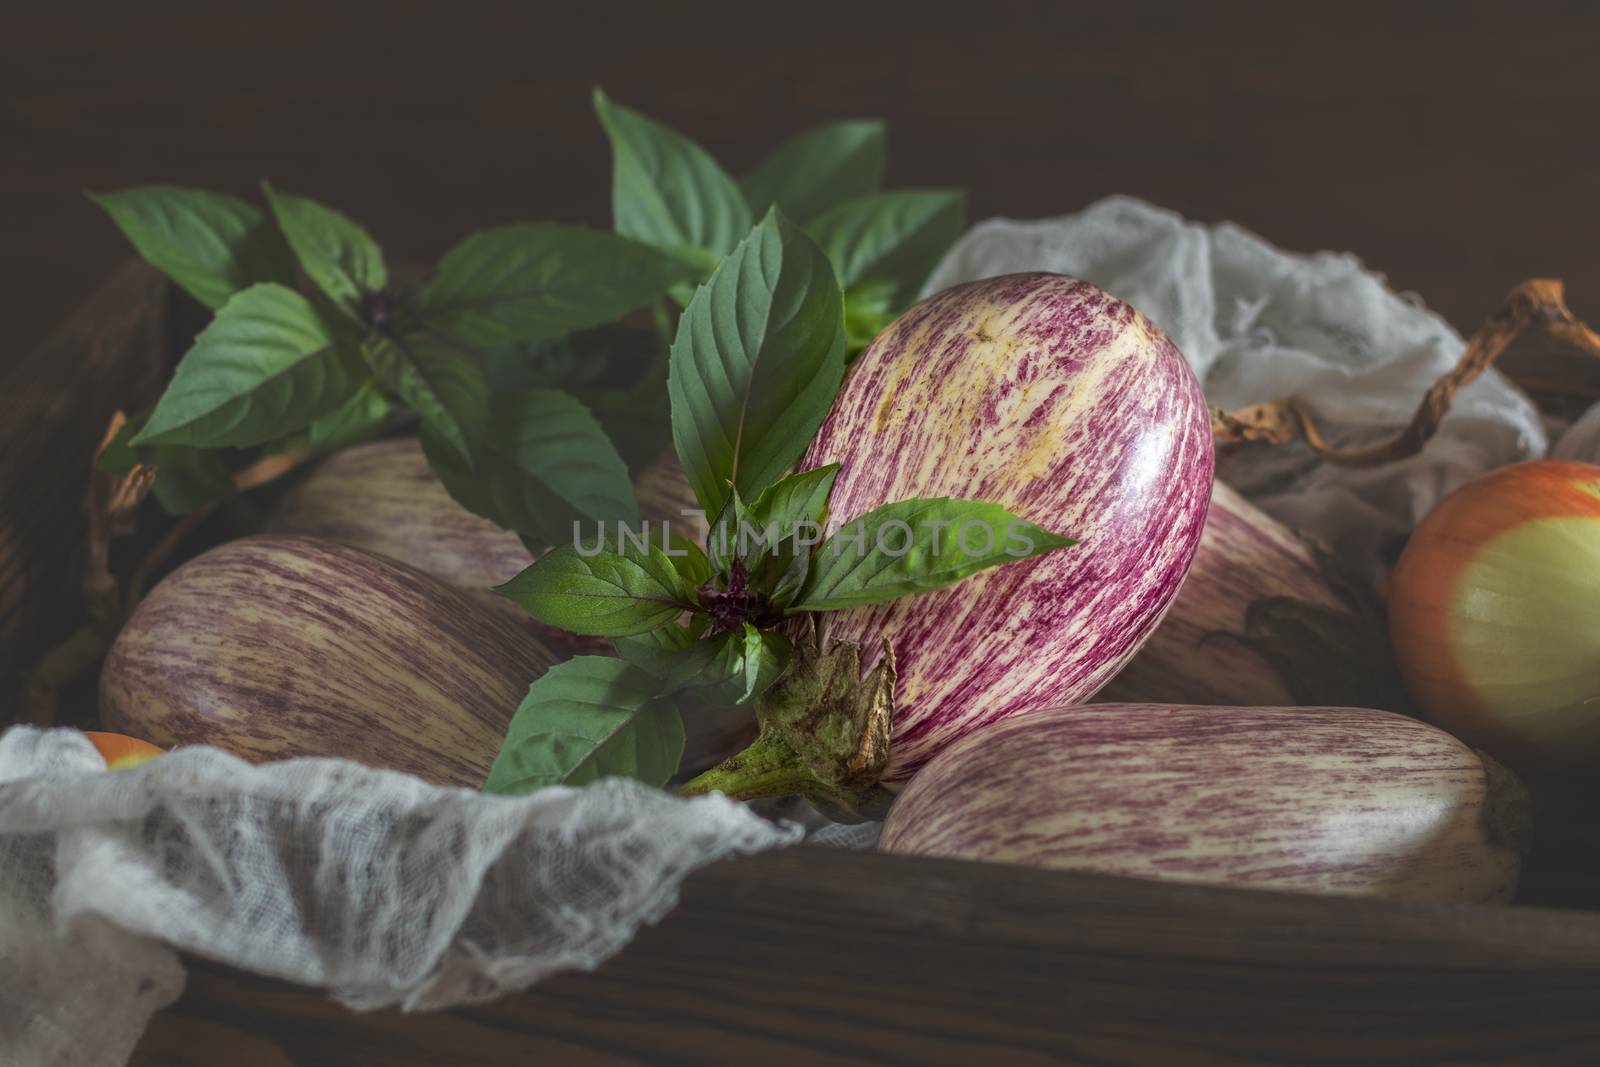 Purple graffiti eggplants, onion and green fresh basil in a wooden box in a vintage wooden background in rustic style, selective focus